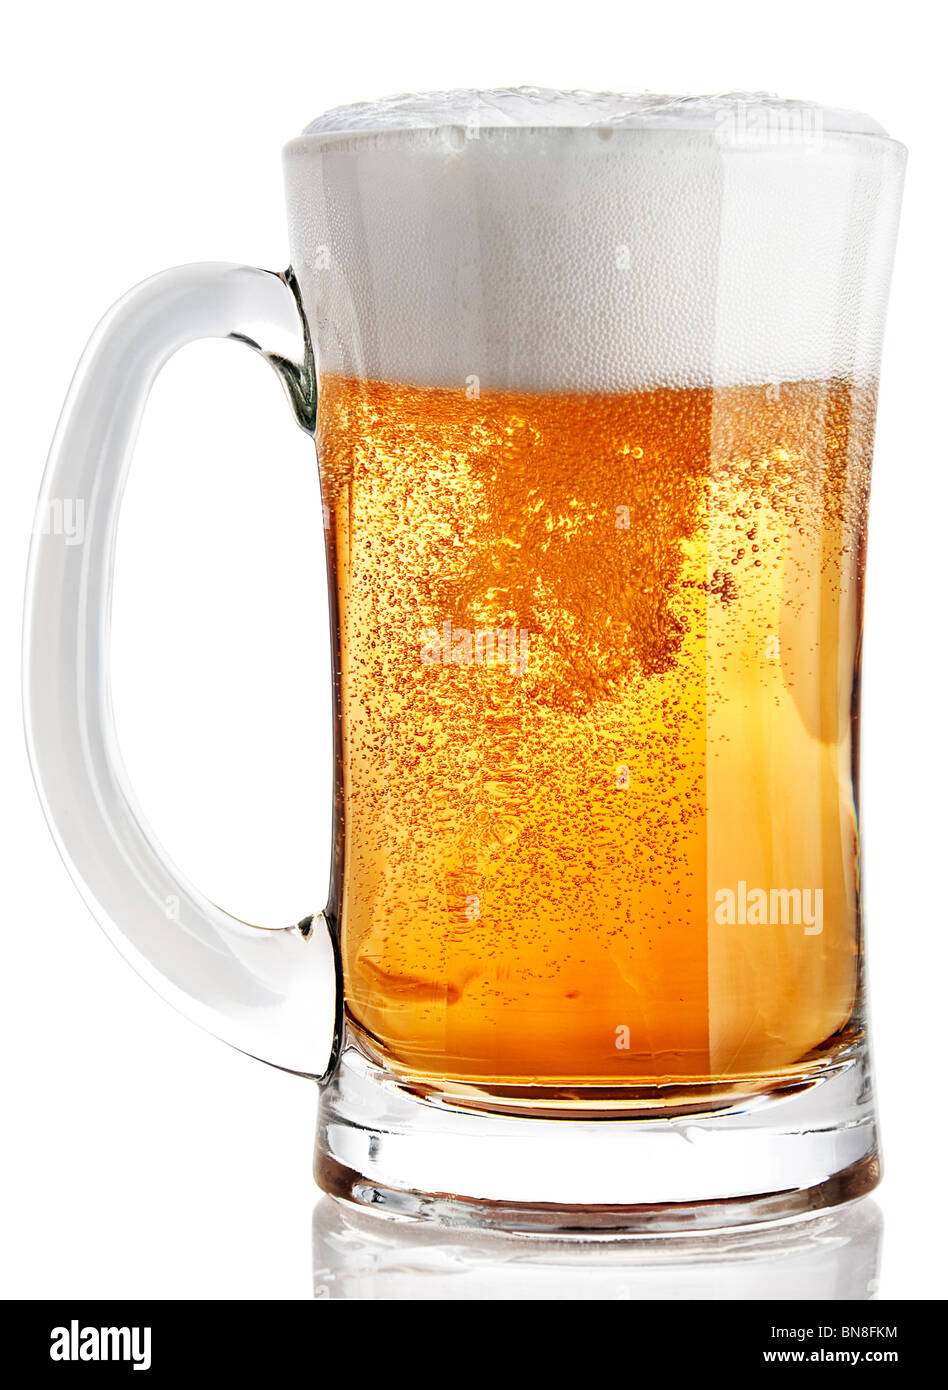 Lager beer closeup in glass dishware with handle Stock Photo